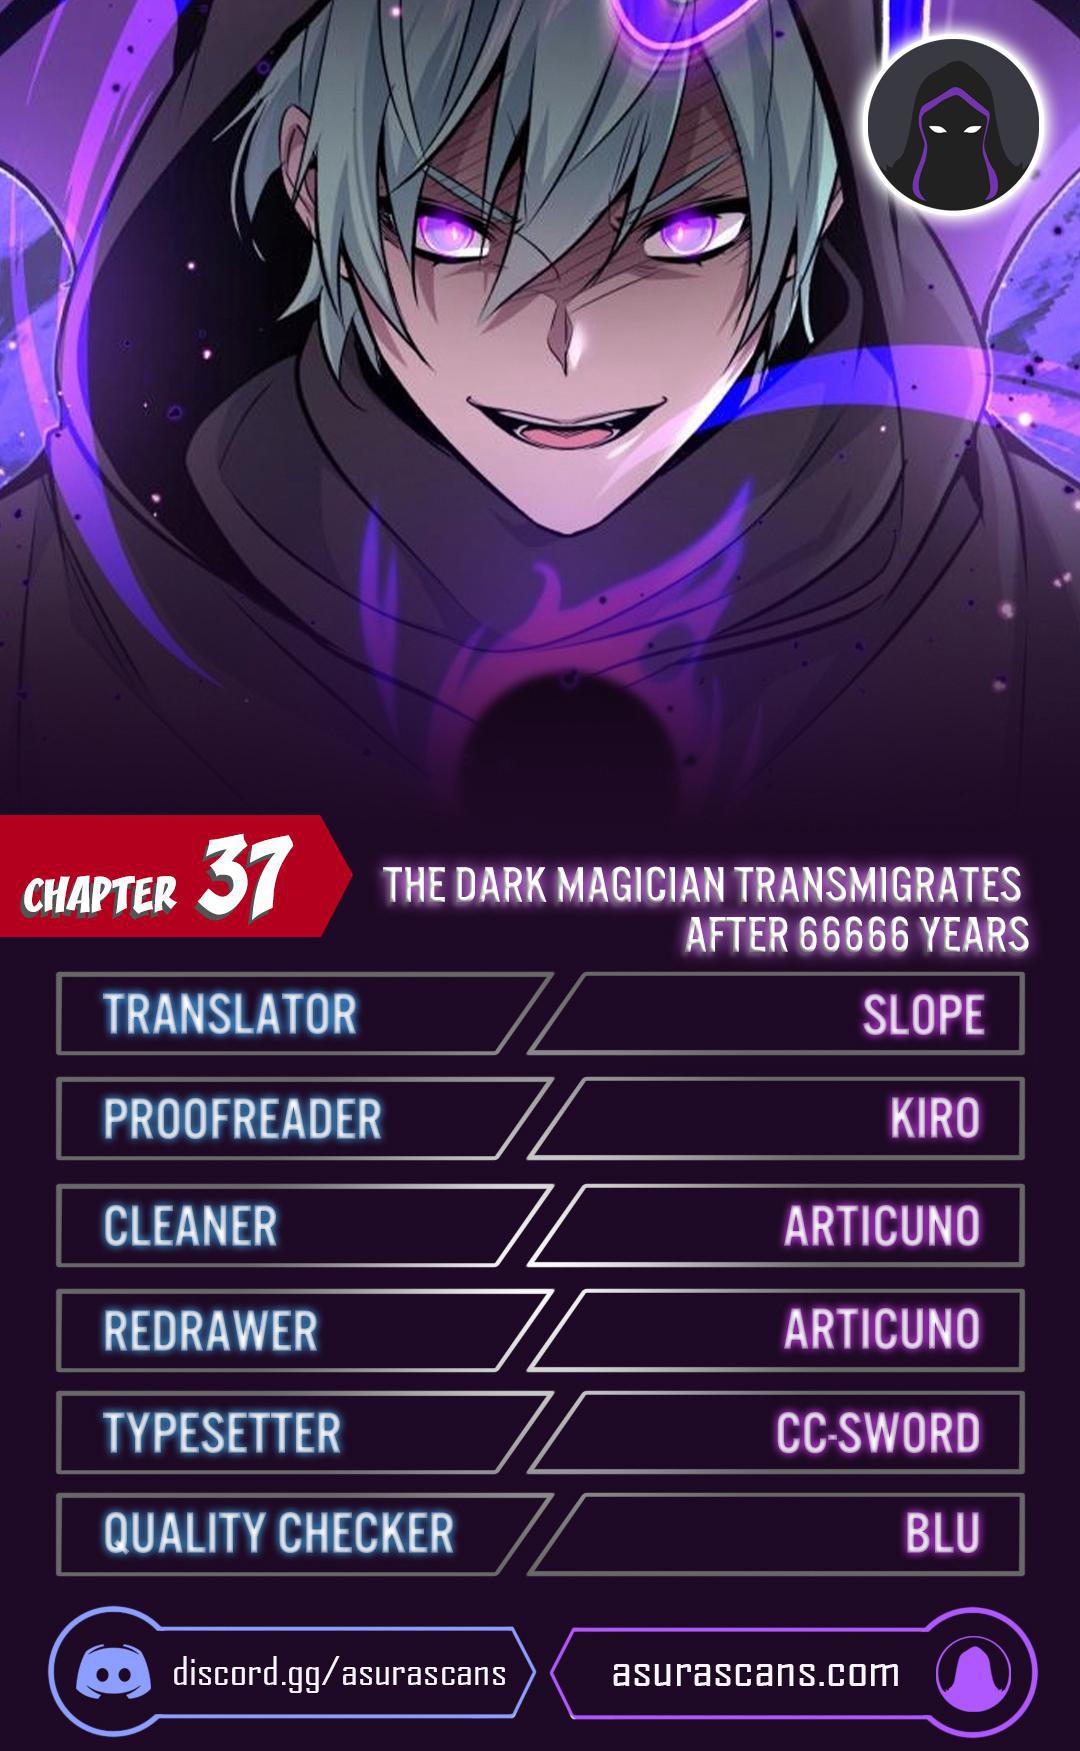 The Dark Magician Transmigrates After 66666 Years chapter 37, The Dark Magician Transmigrates chapter 37